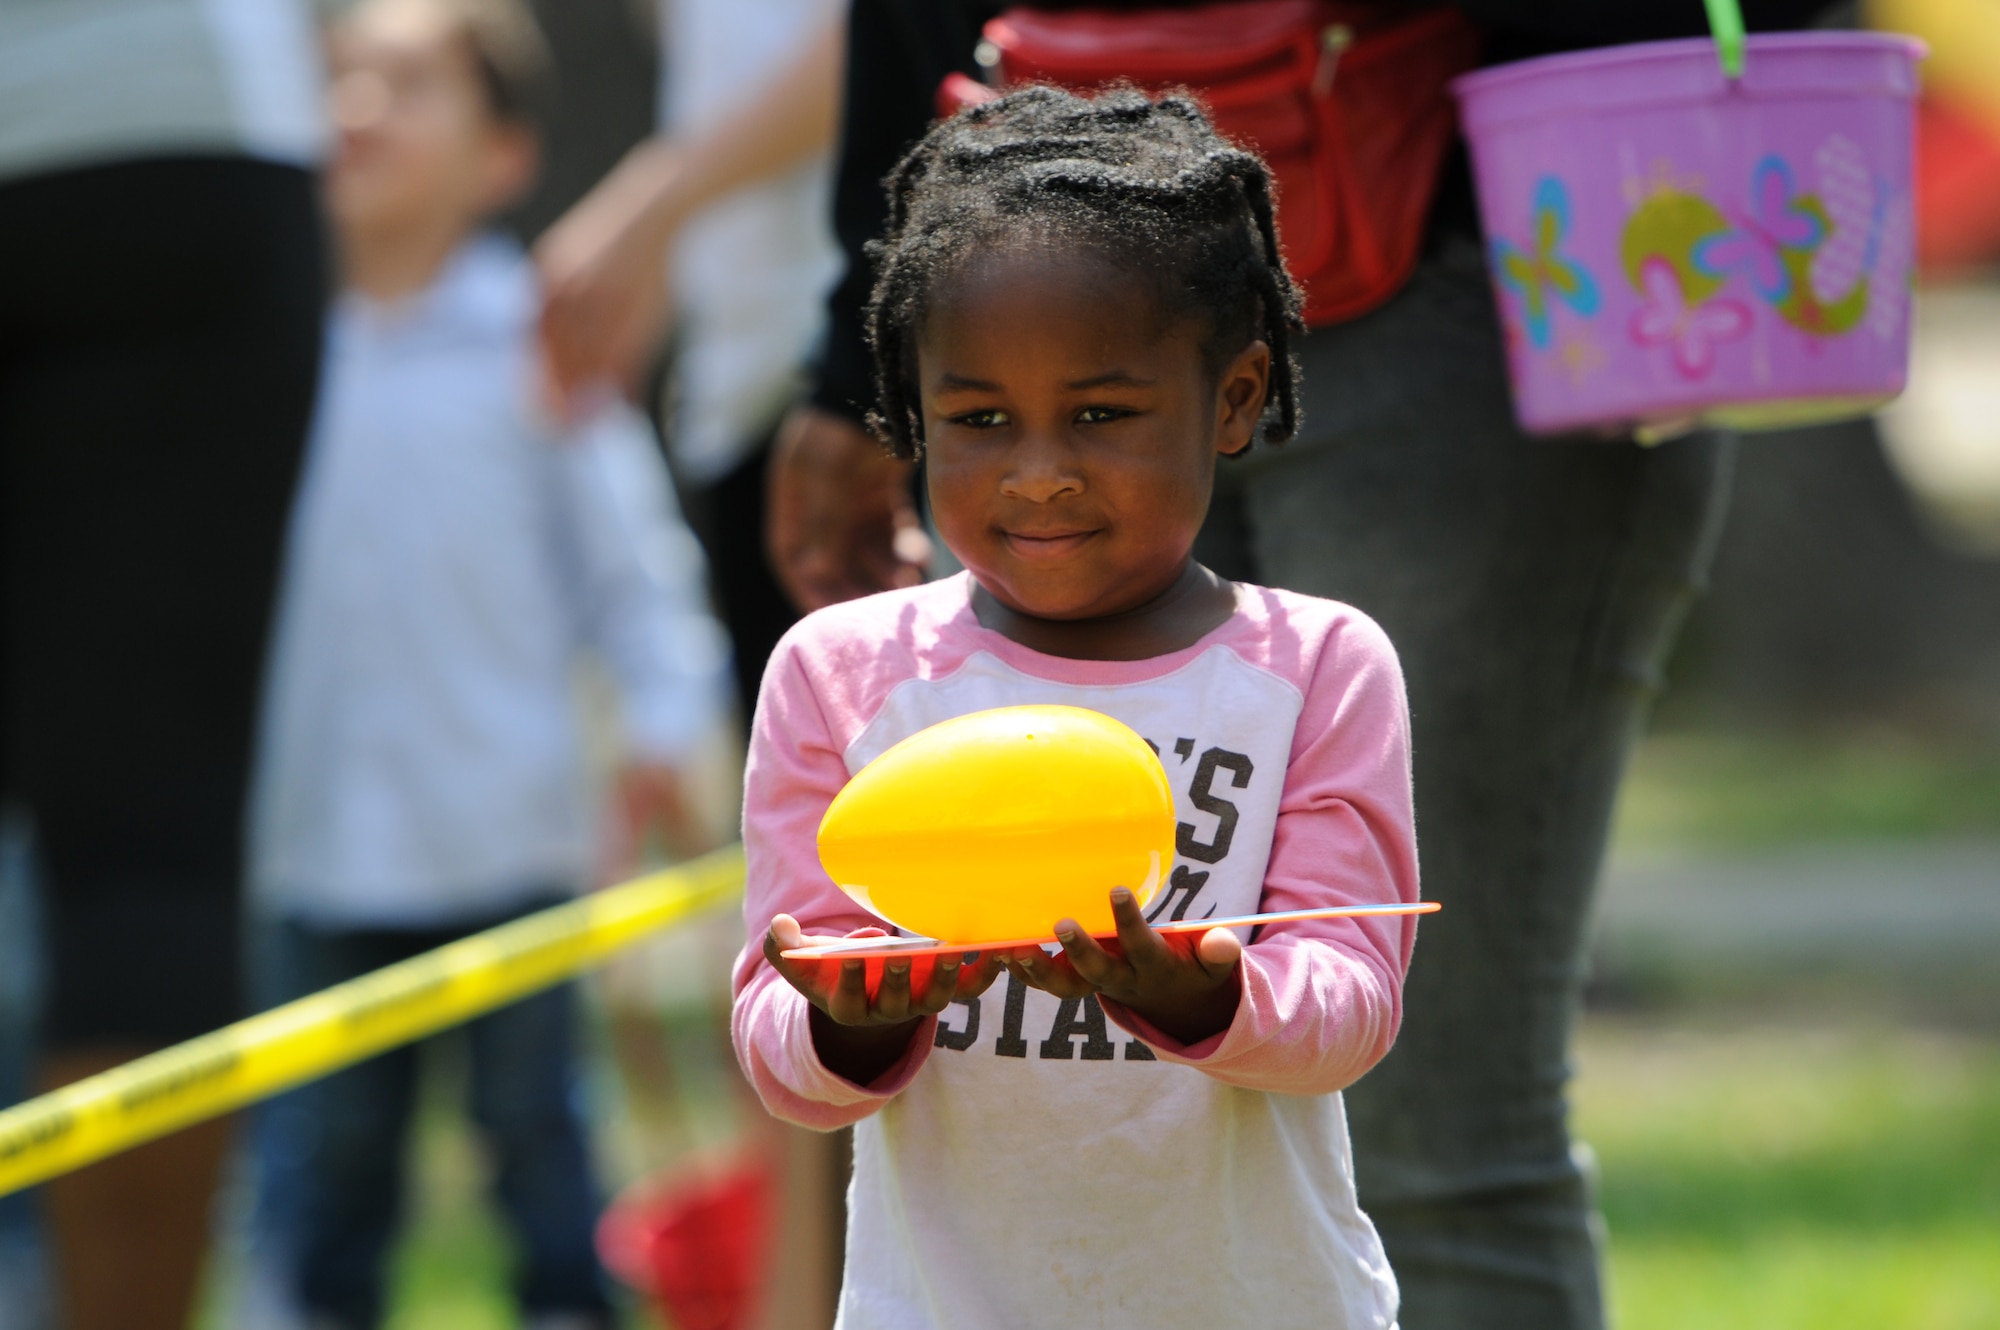 Lovely Arnold, daughter of Staff Sgt. Duron Arnold, 81st Security Forces Squadron unit deployment manager, participates in a balancing egg game during Easter in the Park at the marina Mar. 26, 2016, Keesler Air Force Base, Miss. The event also included an egg hunt, a youth fun run, arts and crafts and visits with the Easter Bunny. (U.S. Air Force photo by Kemberly Groue)